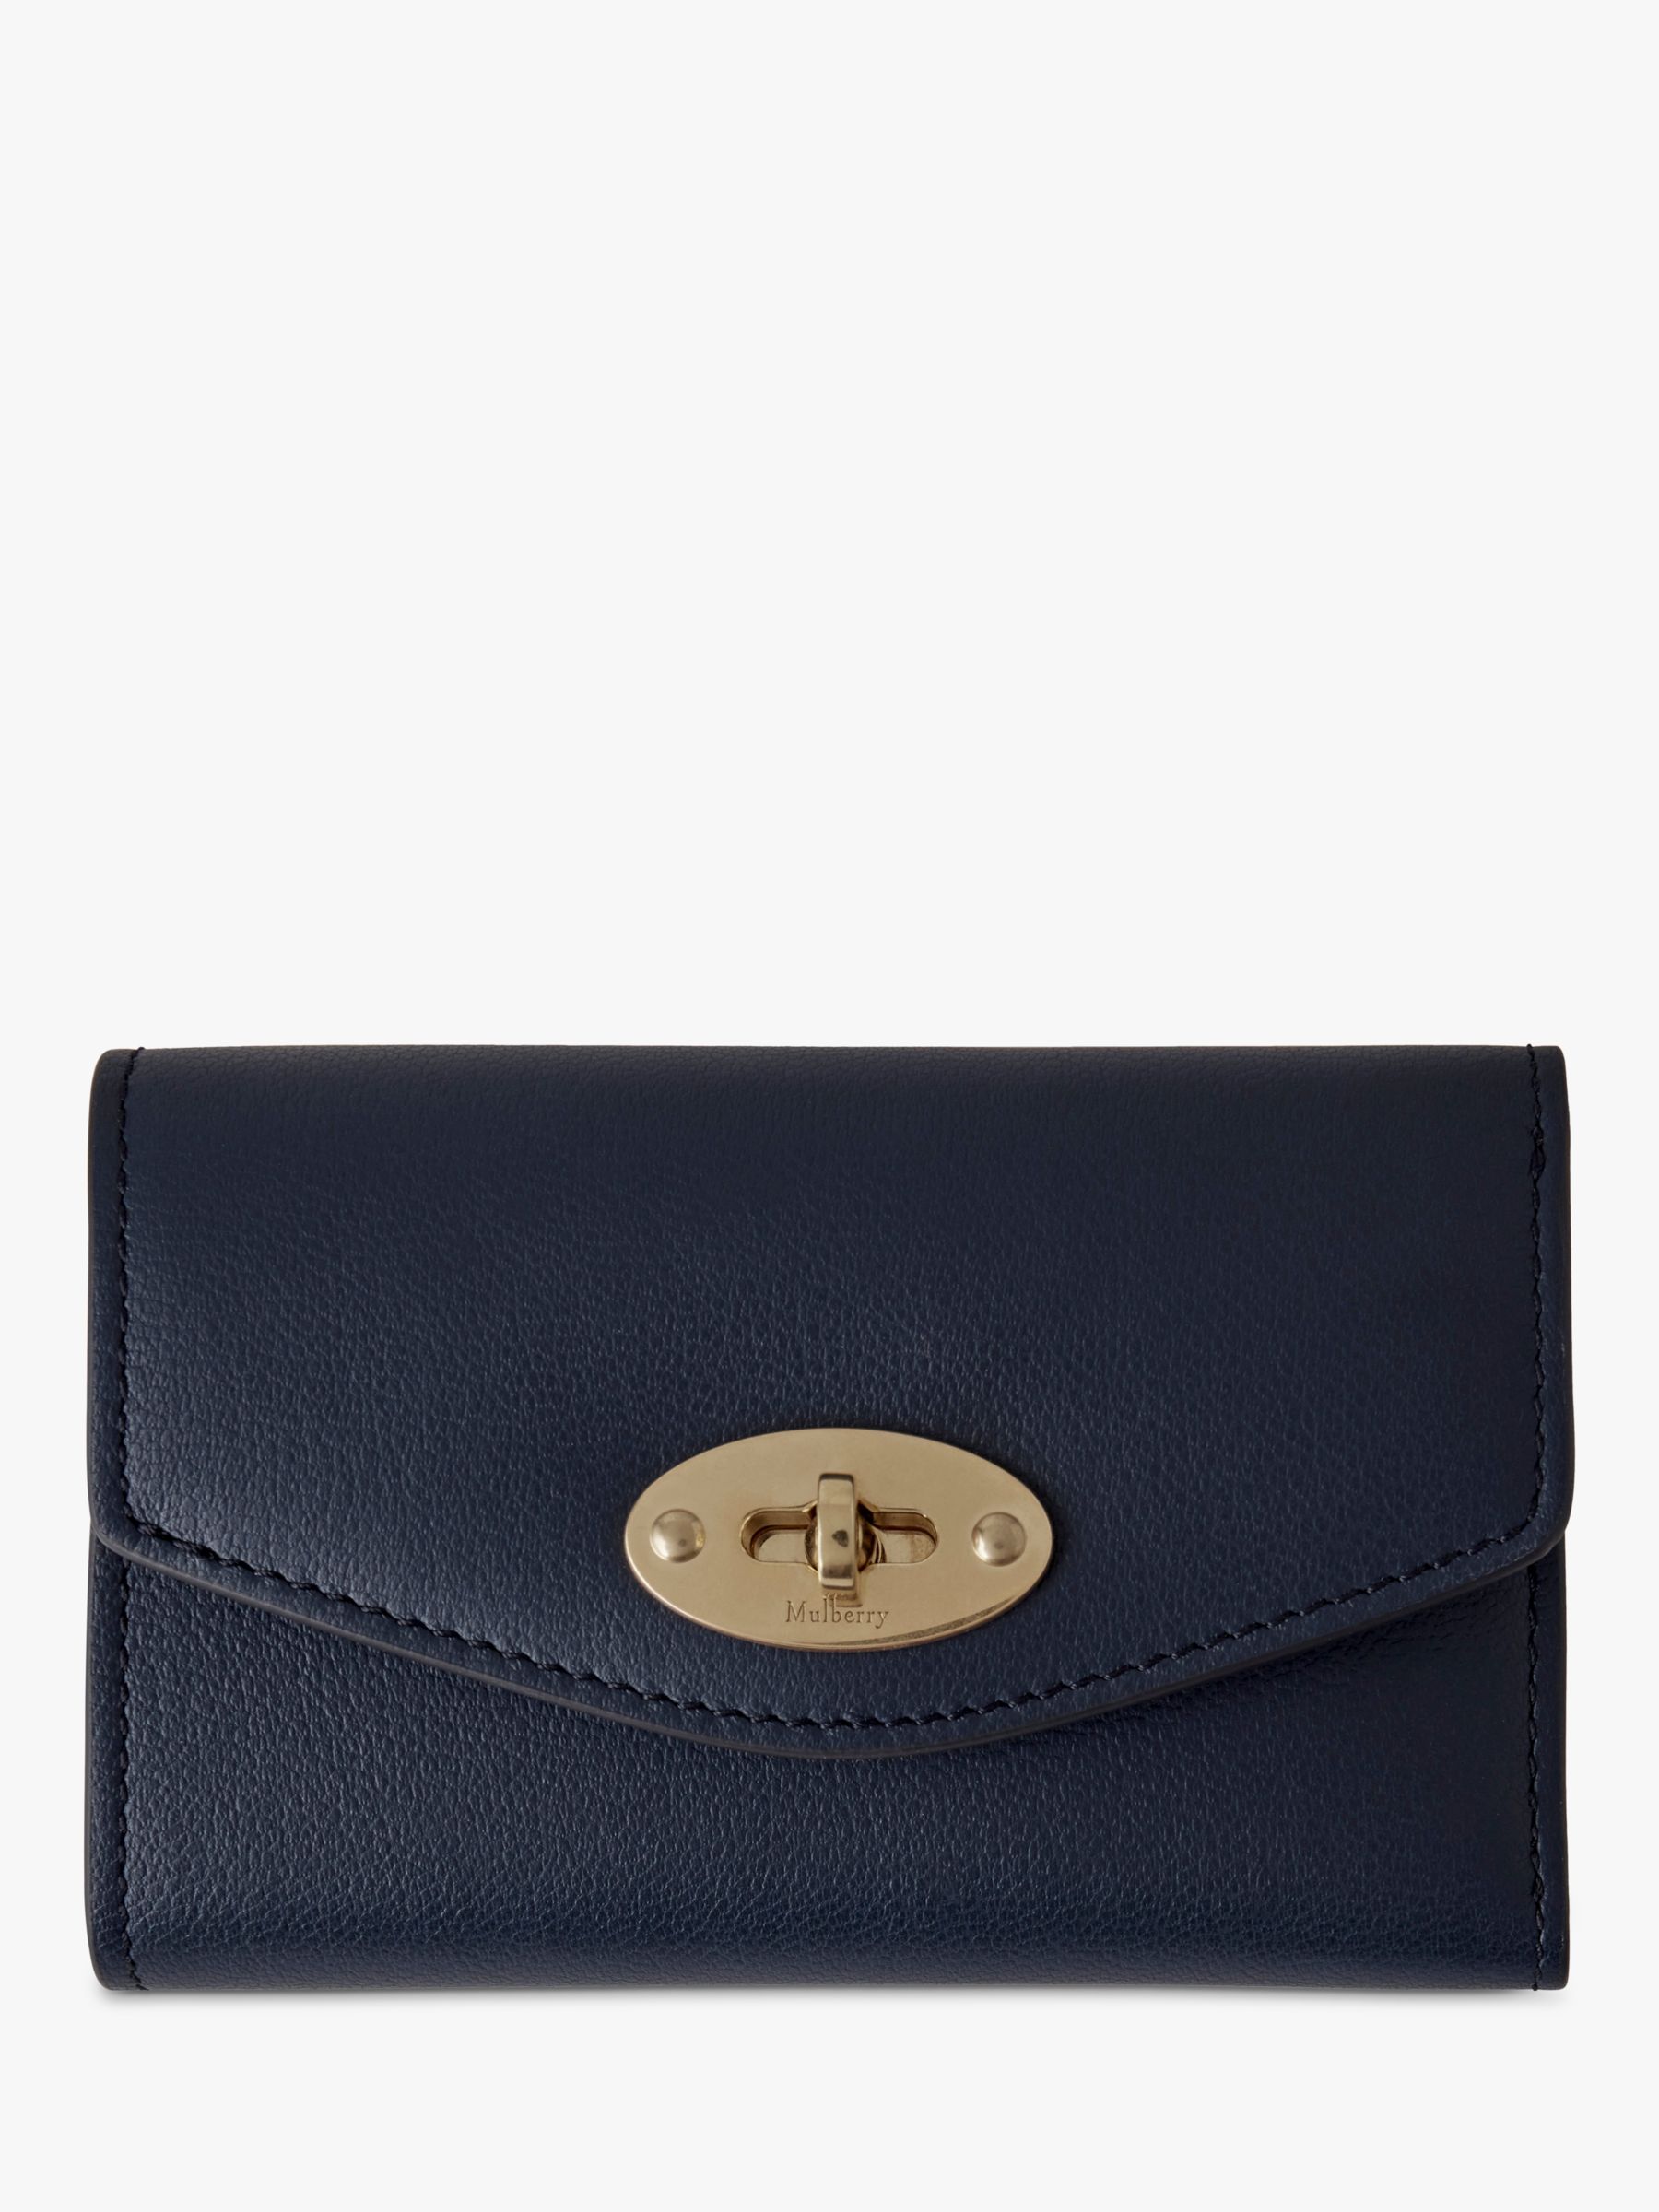 Mulberry Darley Folded Multi-Card Micro Classic Grain Leather Wallet ...